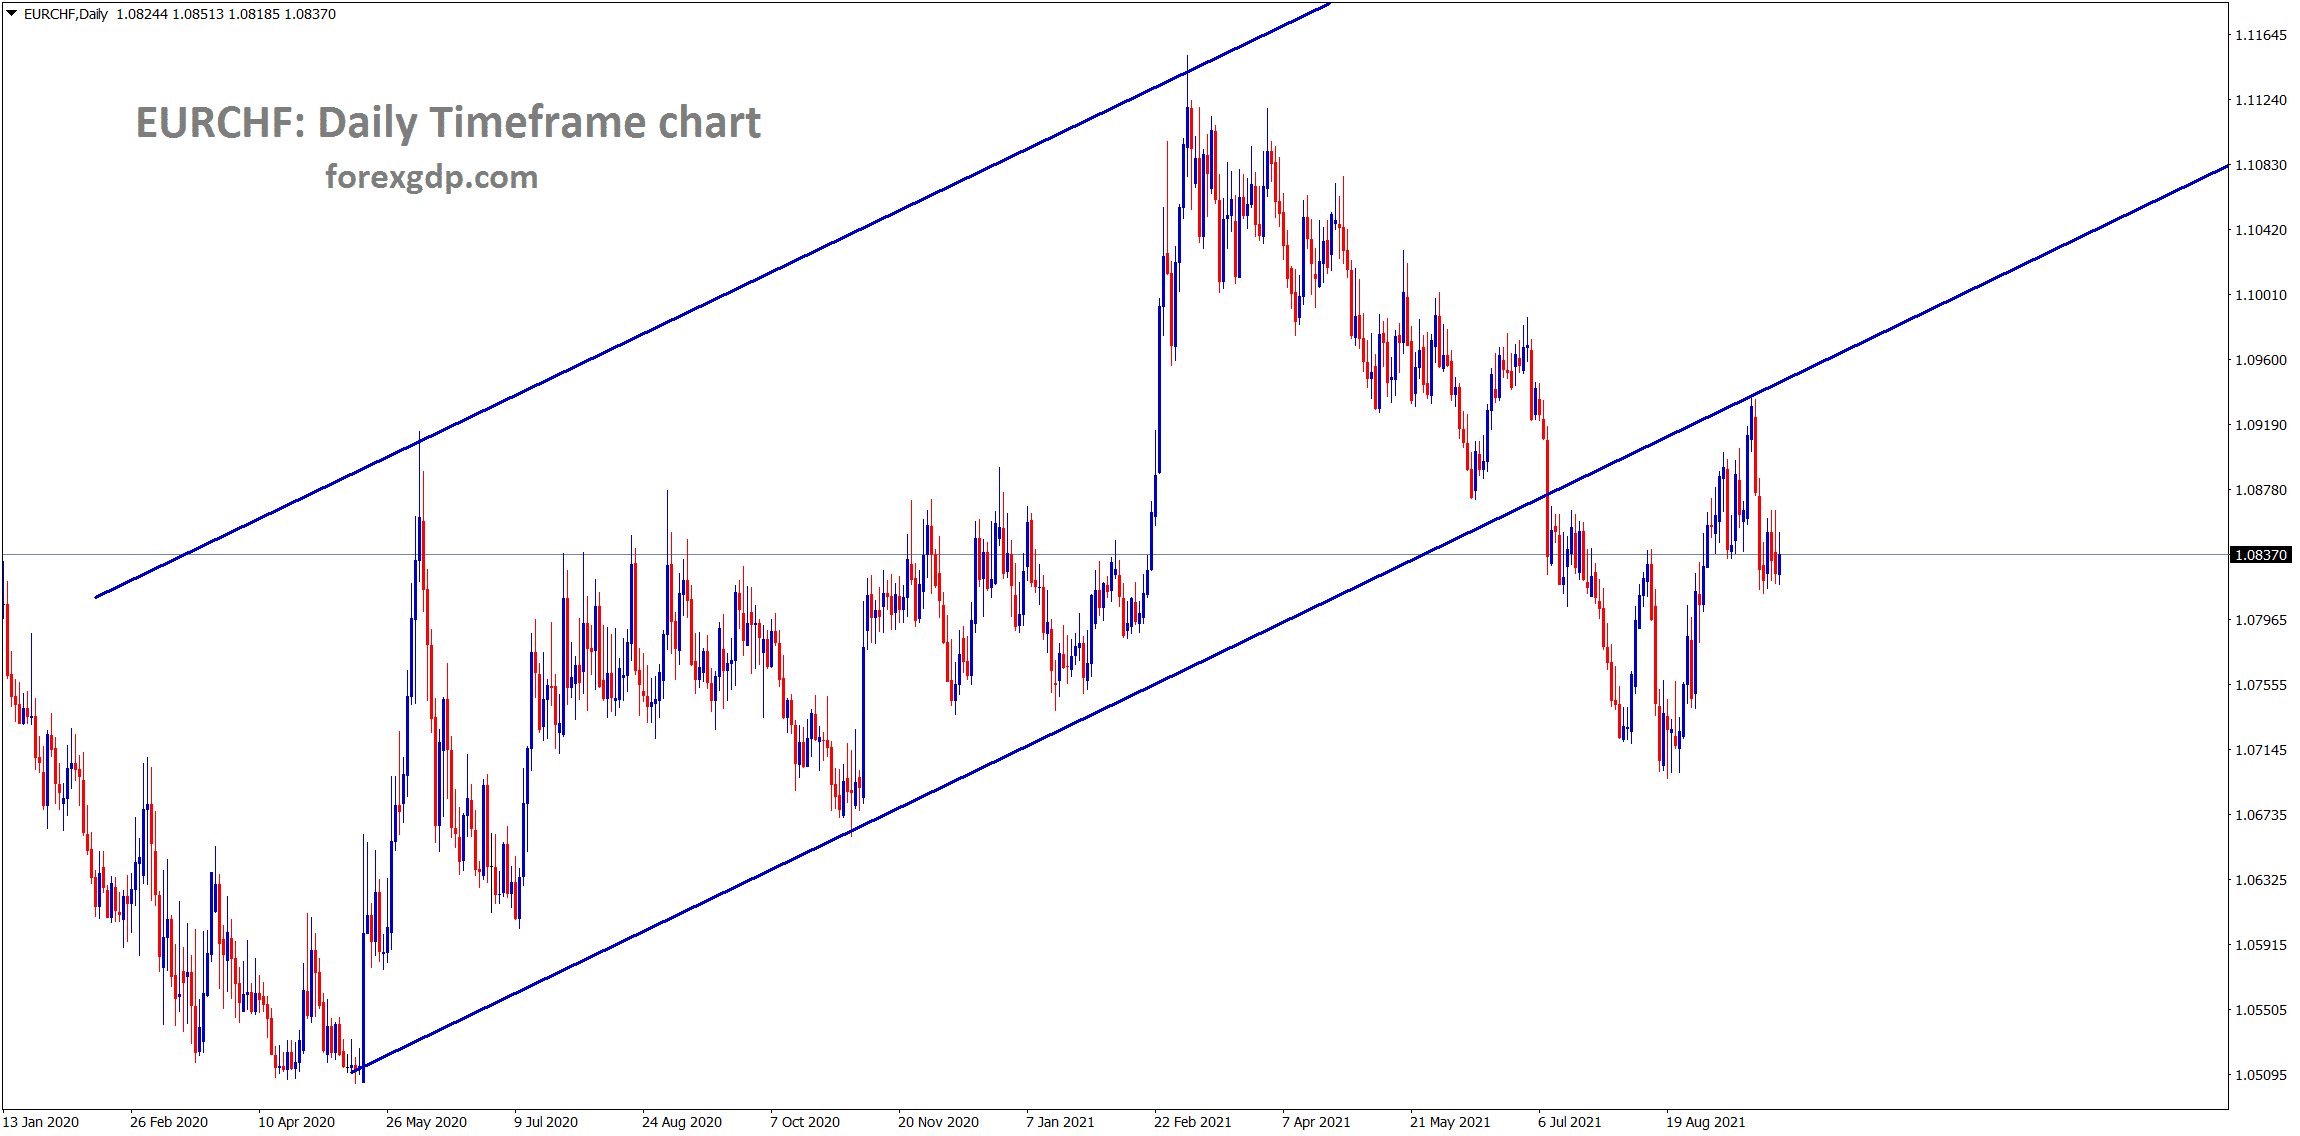 EURCHF has retested the broken ascending channel and consolidating now at the retest area